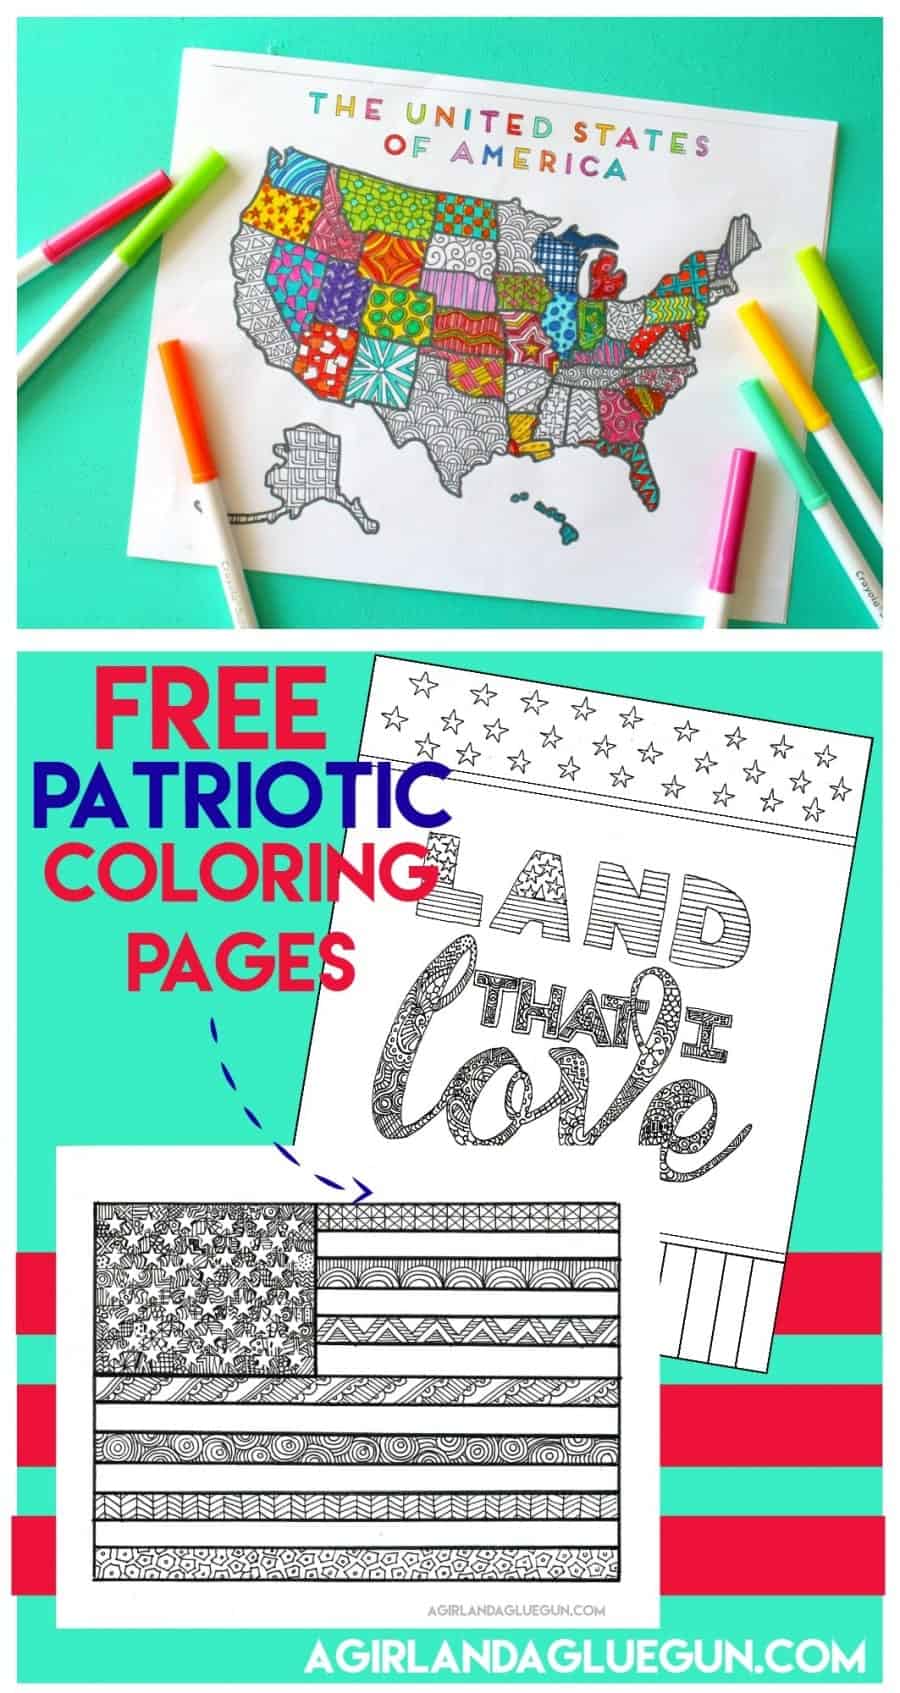 free patriotic coloring pages for the fourth of July!